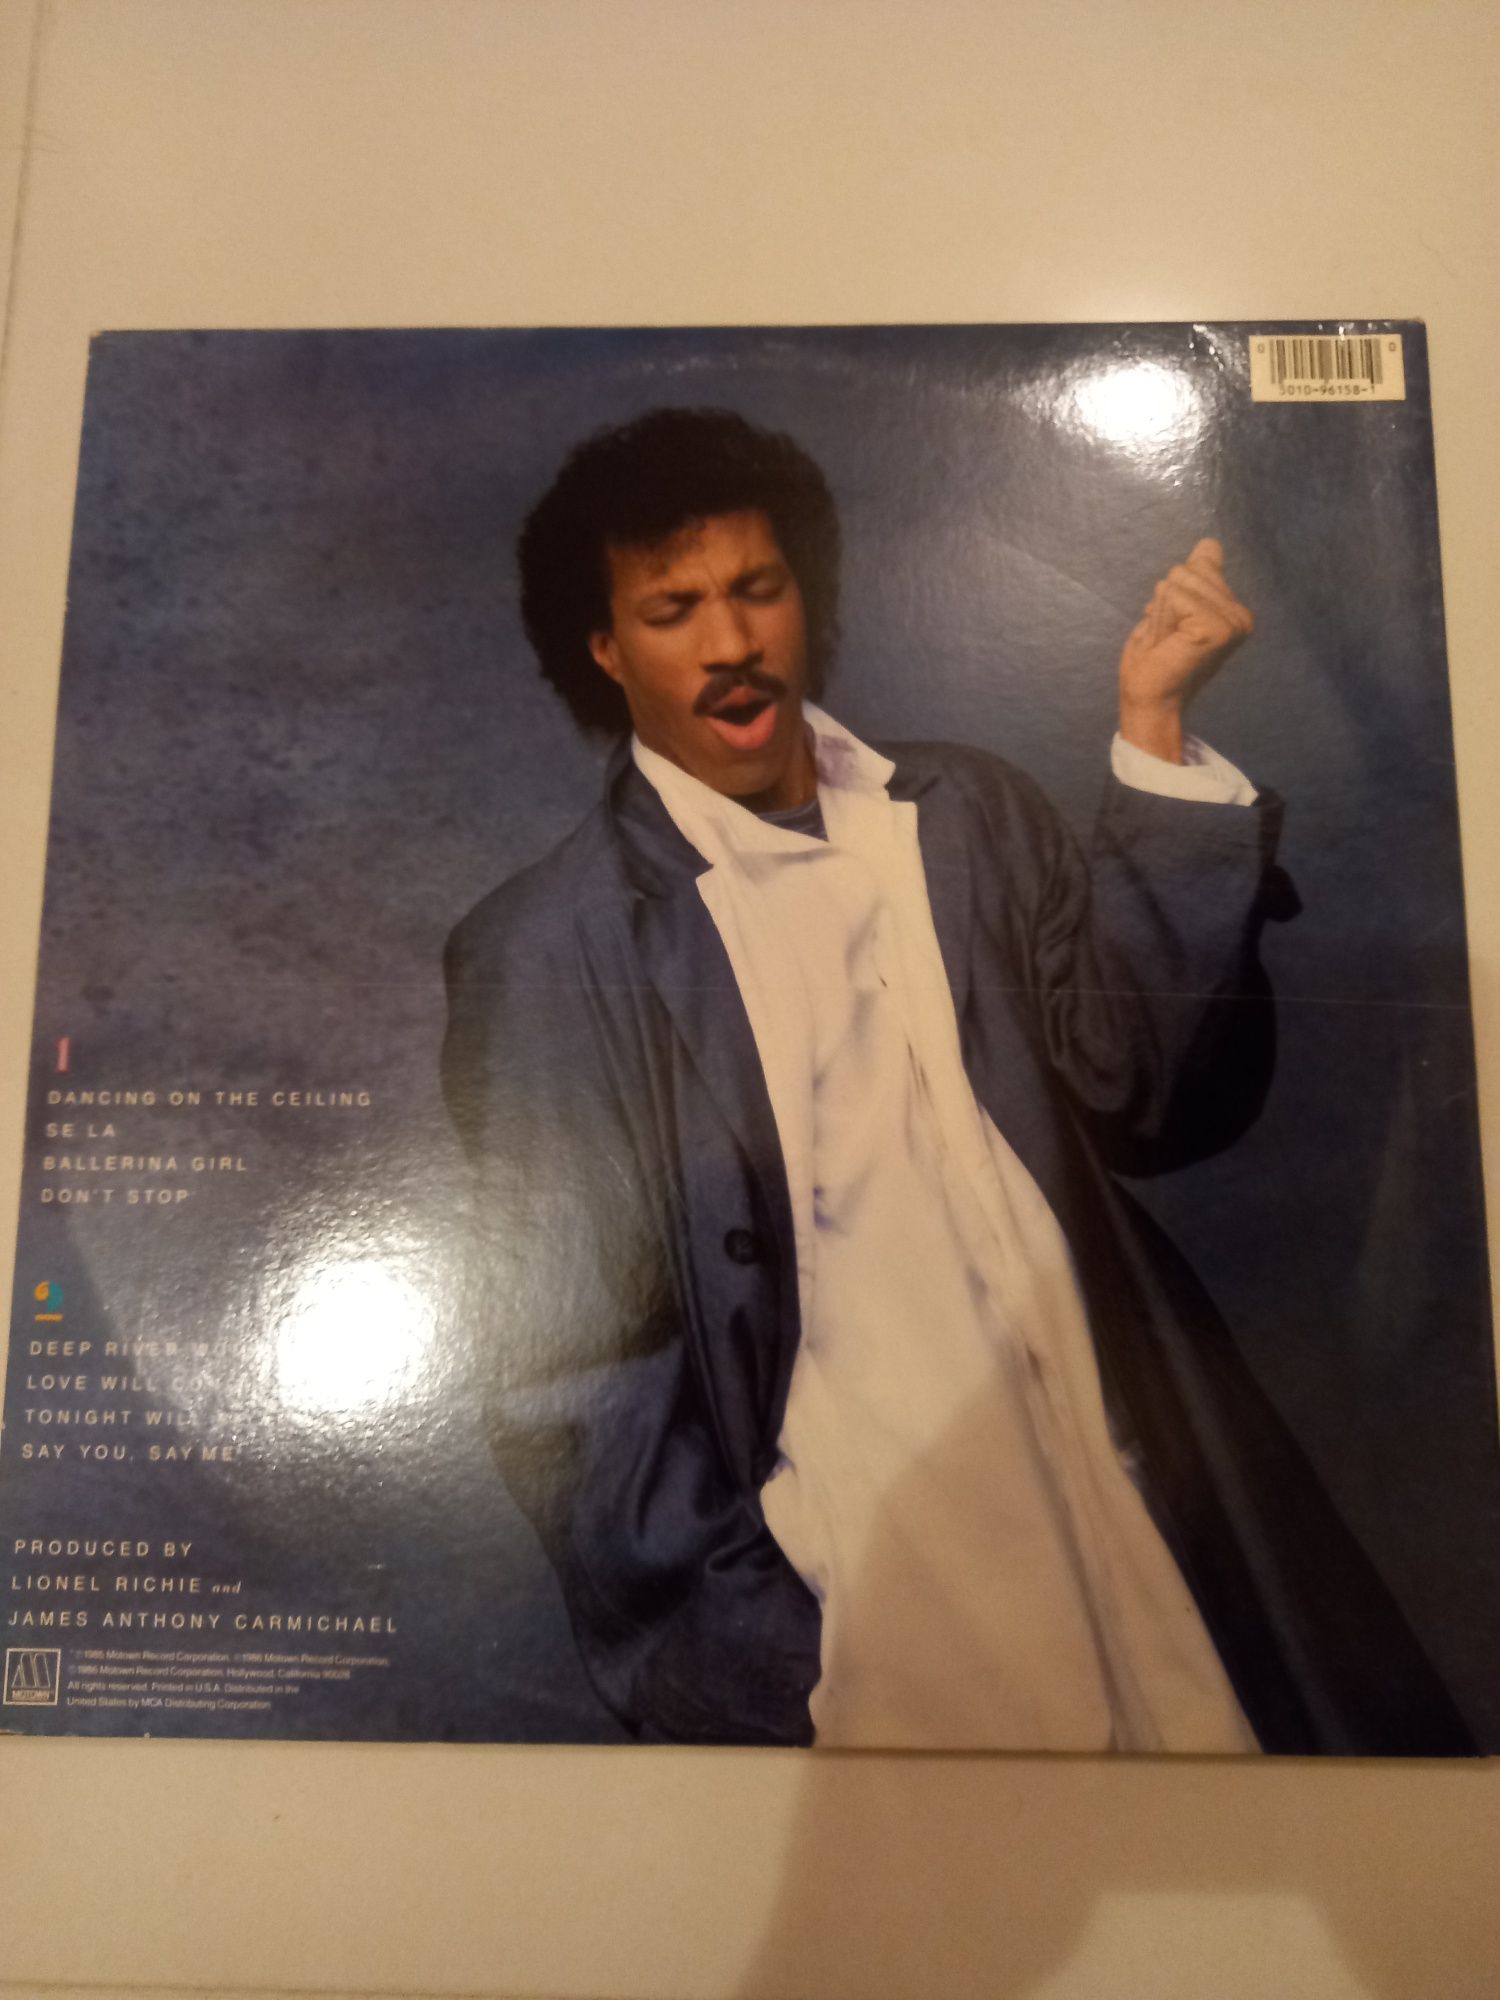 Lionel Richie Dancing of the Ceiling winyl